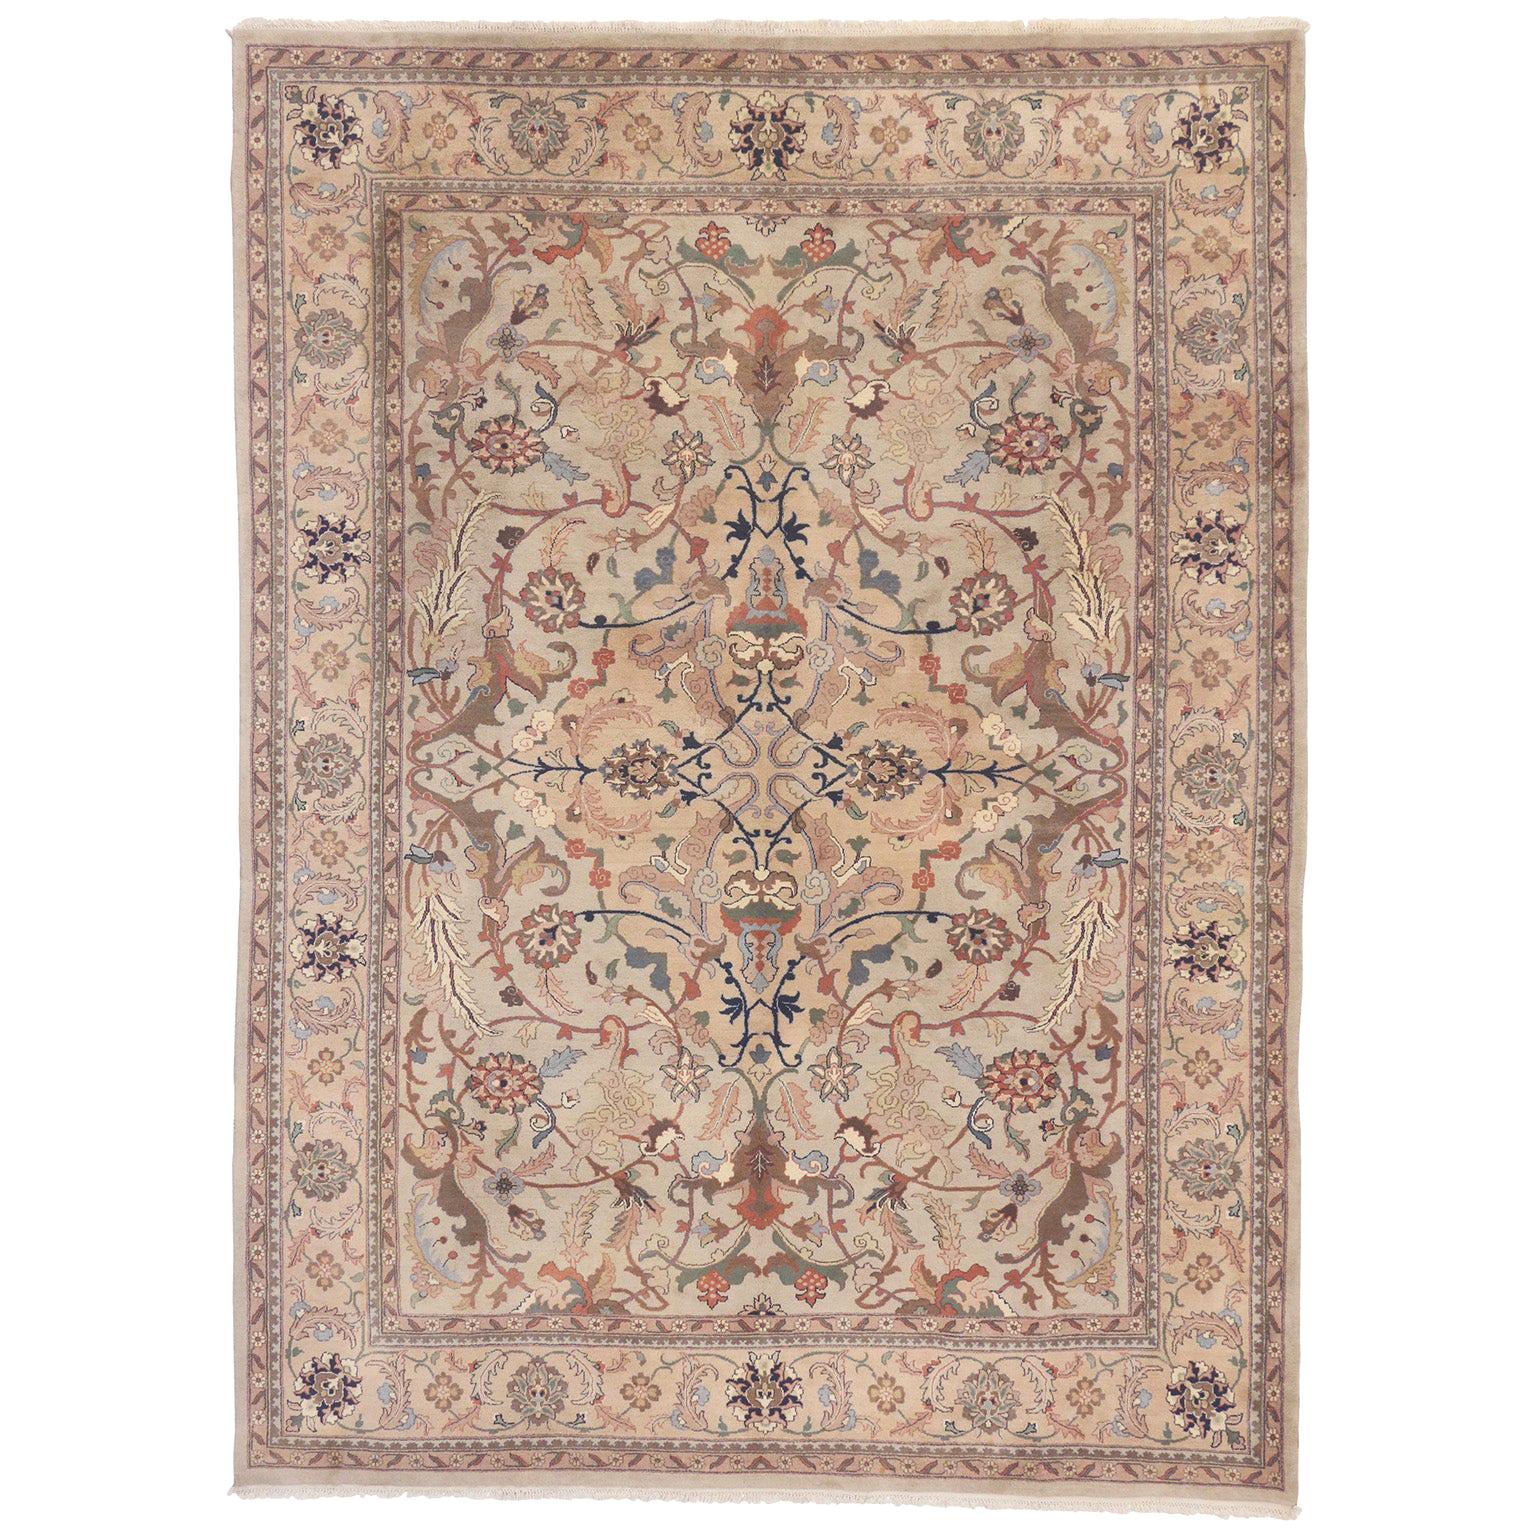 Beautiful Vintage Traditional Rug with Persian Style Herati Design